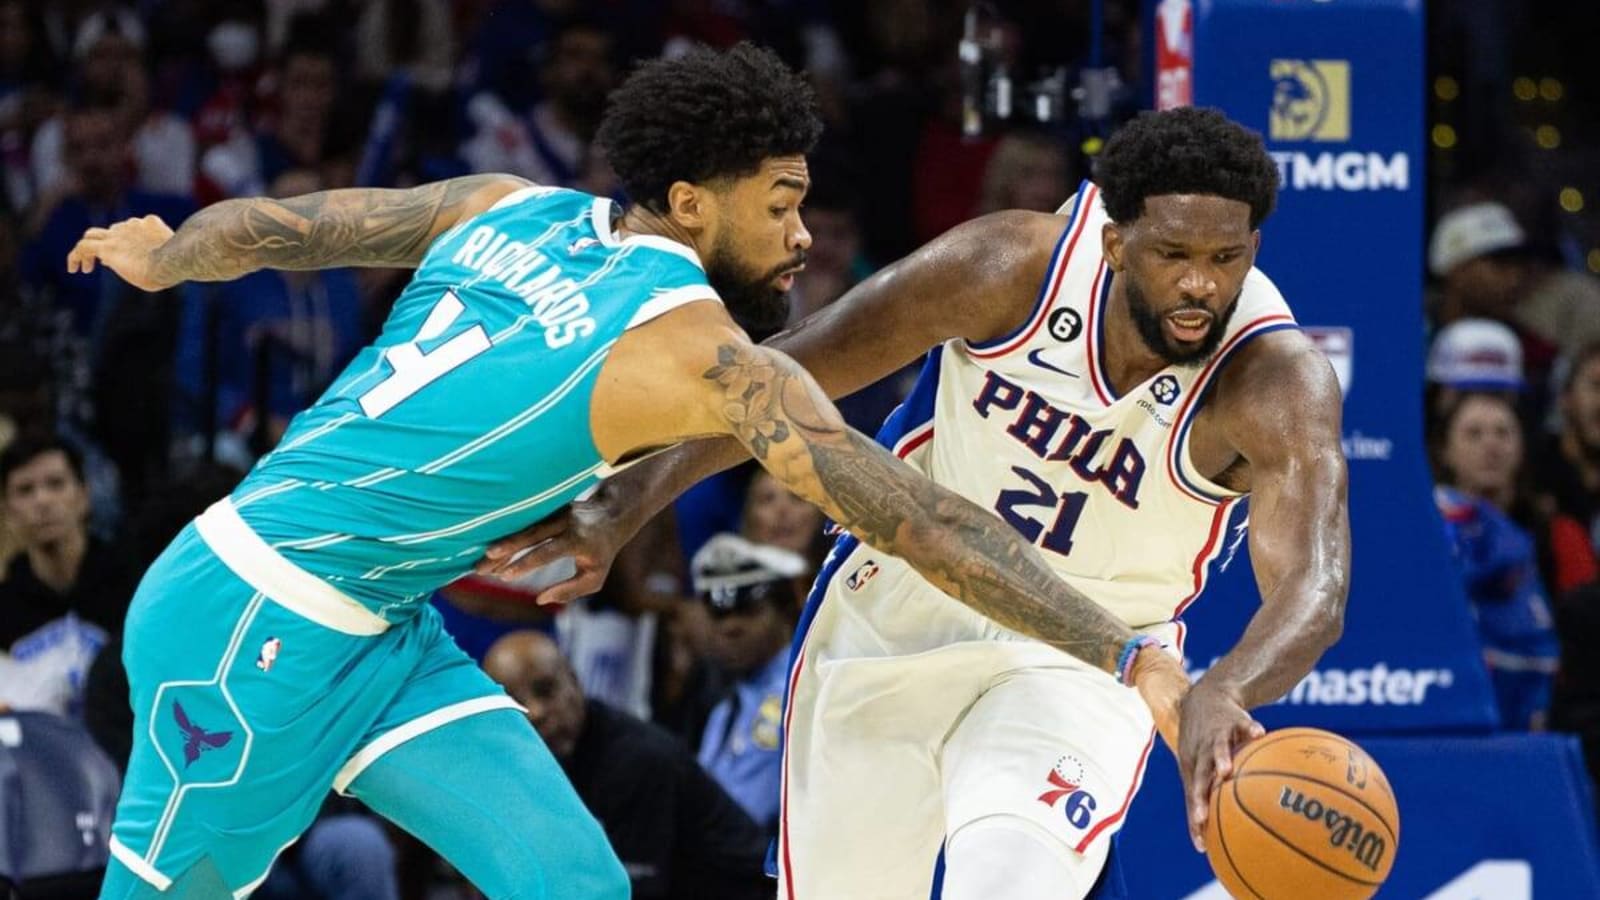 76ers vs. Hornets: What Stood Out in Sixers’ Finale?